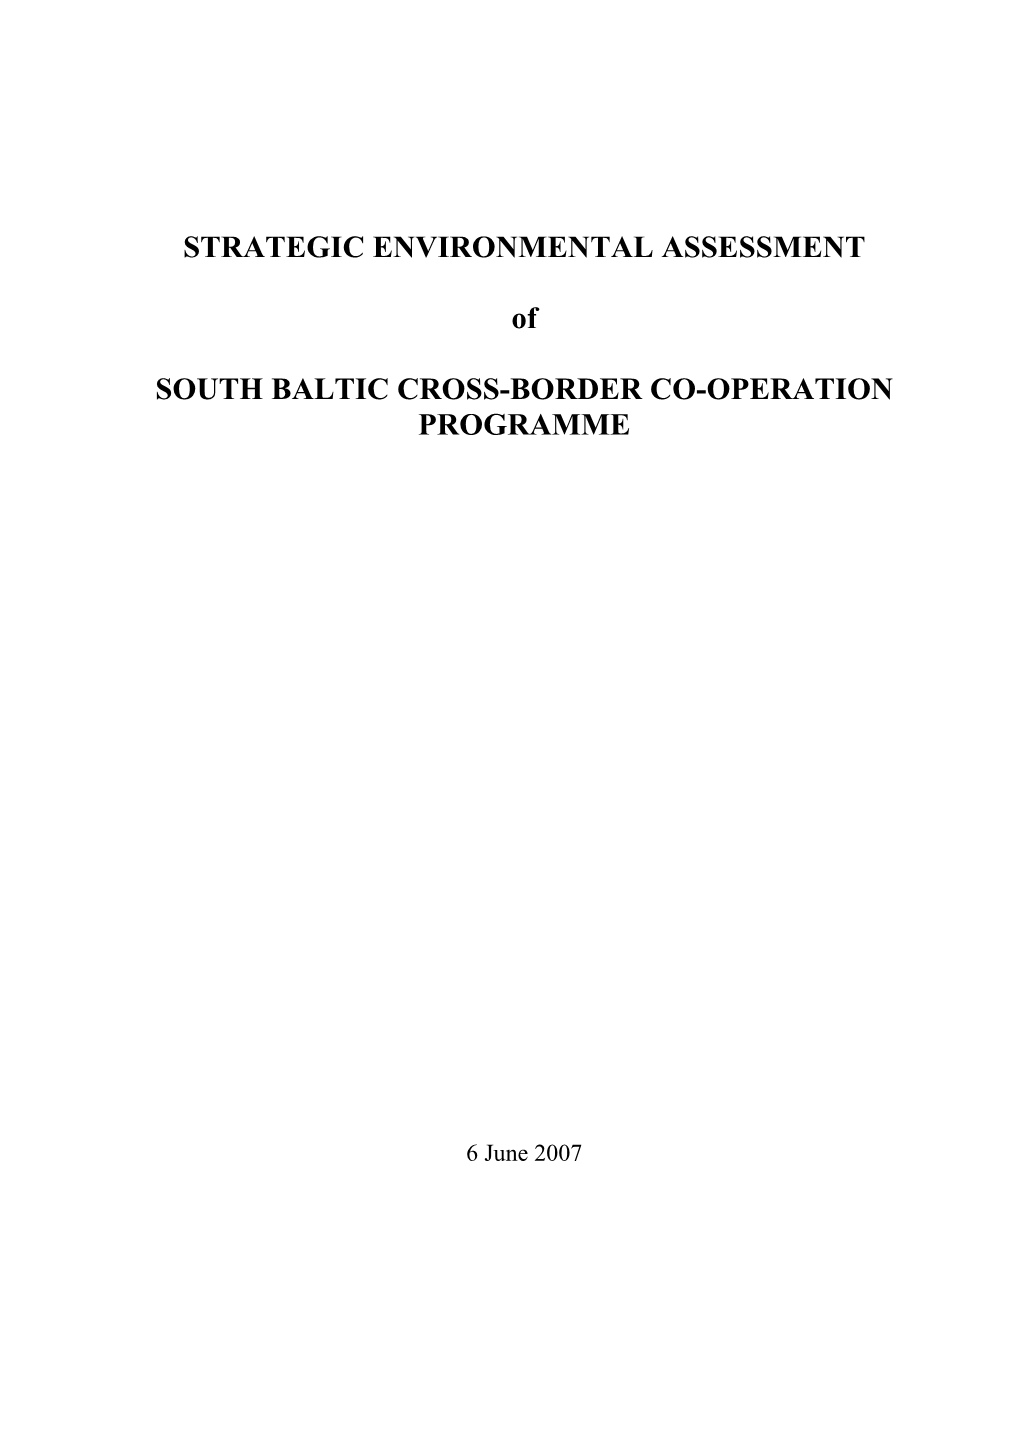 Strategic Environmental Assessment of the South Baltic Cross-Border Co-Operation Programme ______